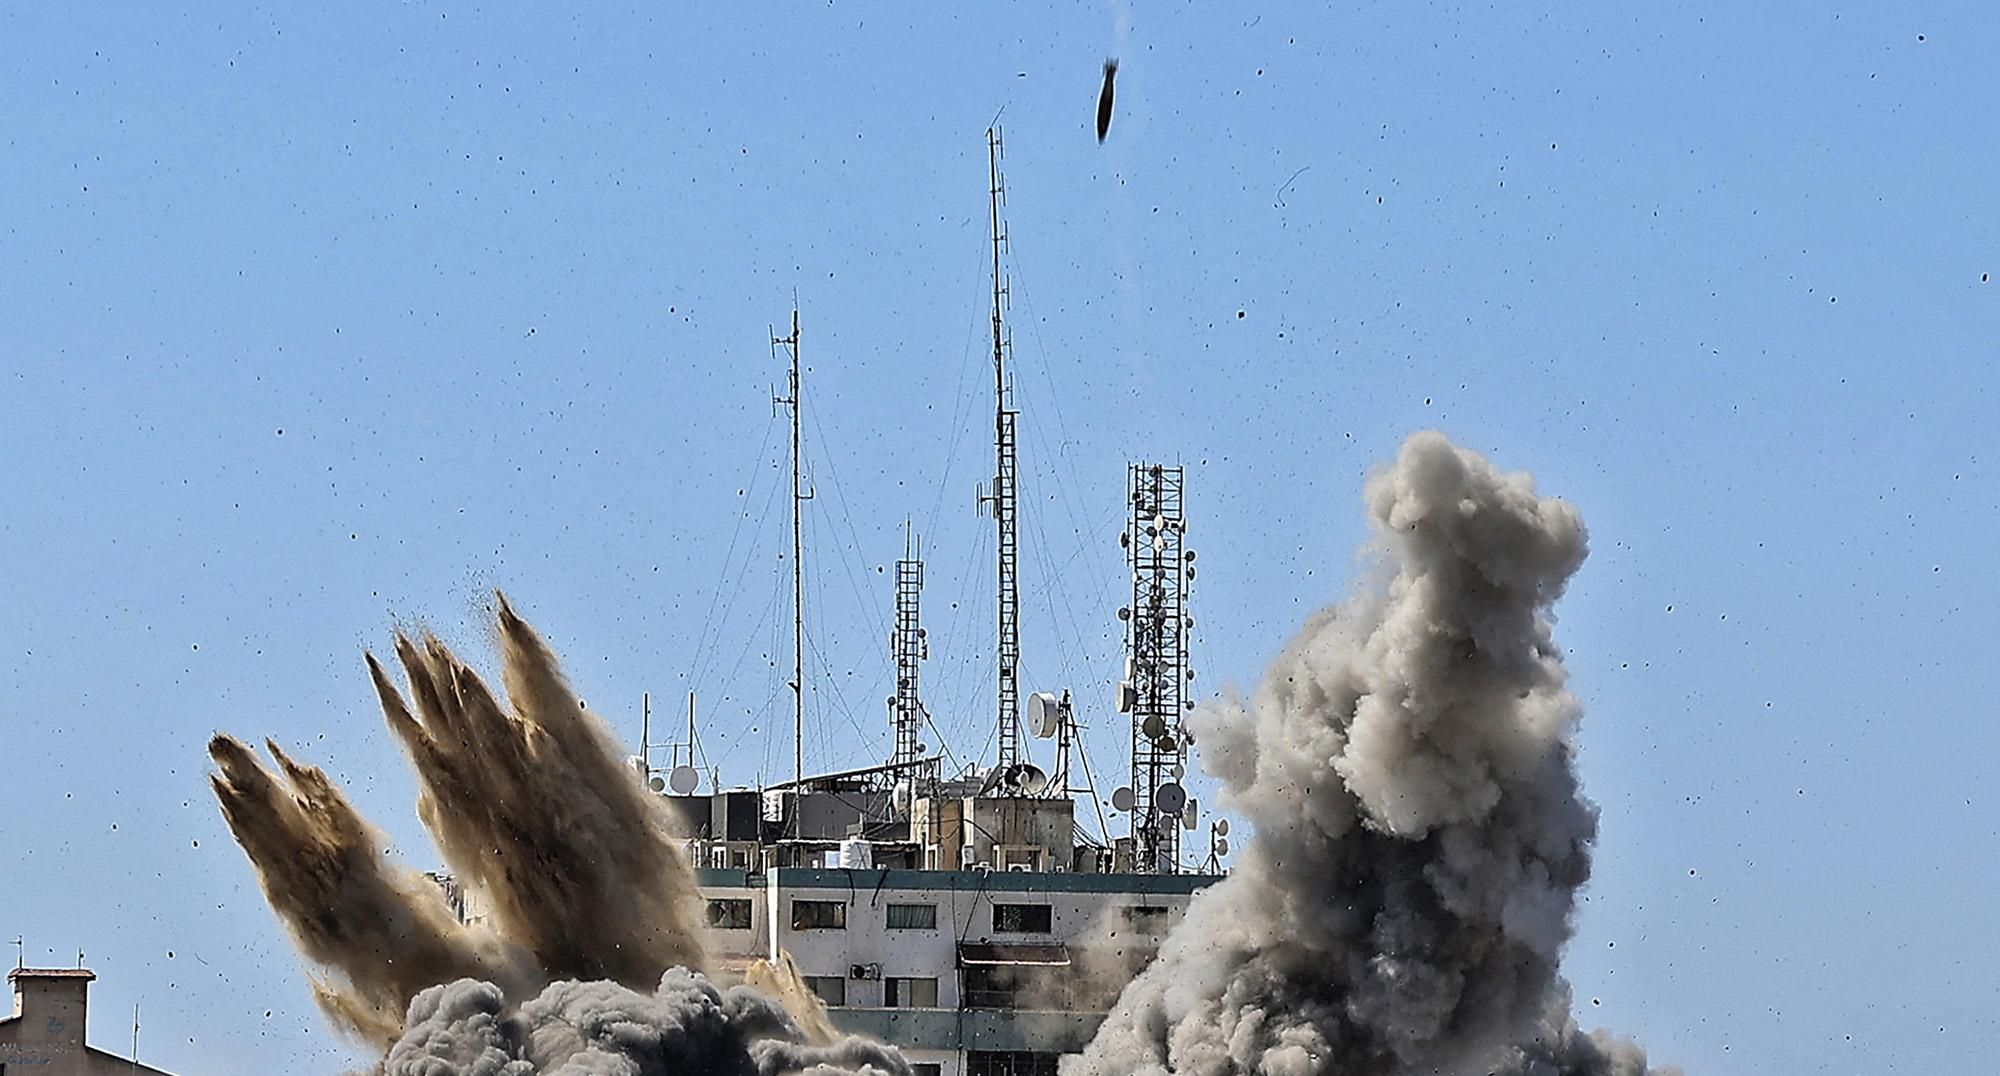 Israel destroyed a high-rise building in Gaza City that housed offices of The Associated Press, Al-Jazeera and other media outlets on Saturday, the latest step by Israel to silence reporting